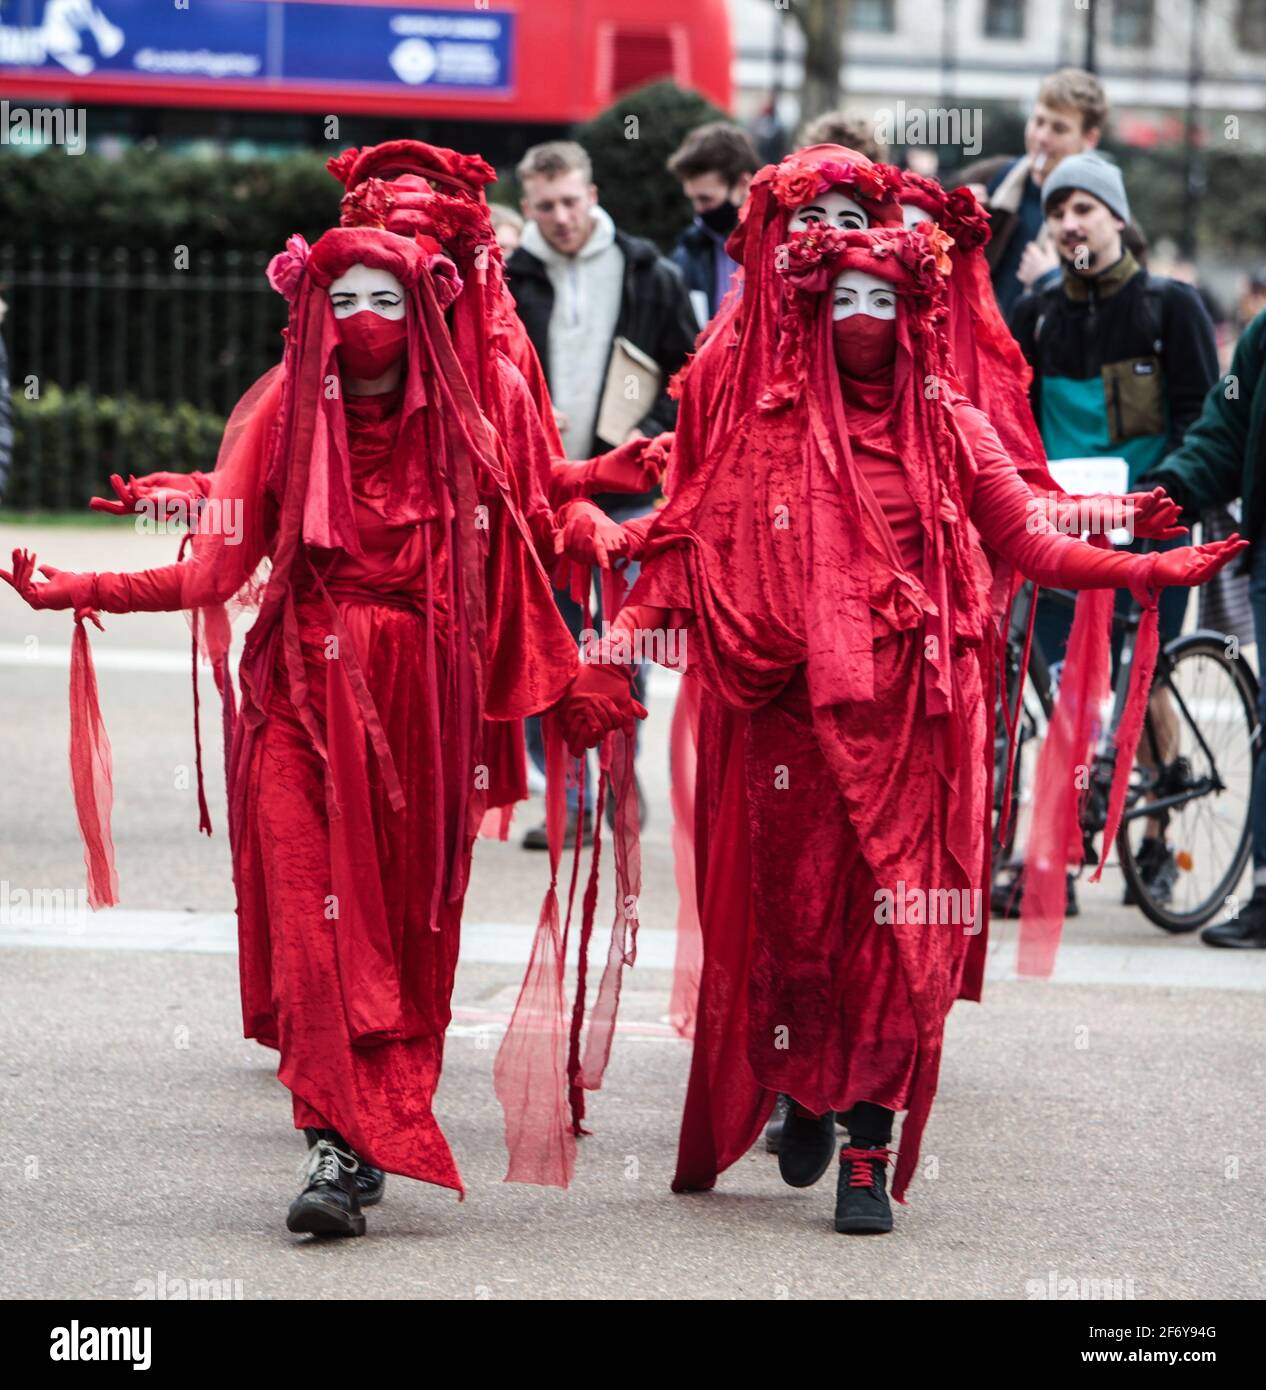 London UK 03 April 2021 Red brigades from Extinction Rebellion  drape themselves in robes  resembling blood  at the Kill The Bill prophets in Hyde Park  today,Paul Quezada-Neiman/Alamy live News Stock Photo